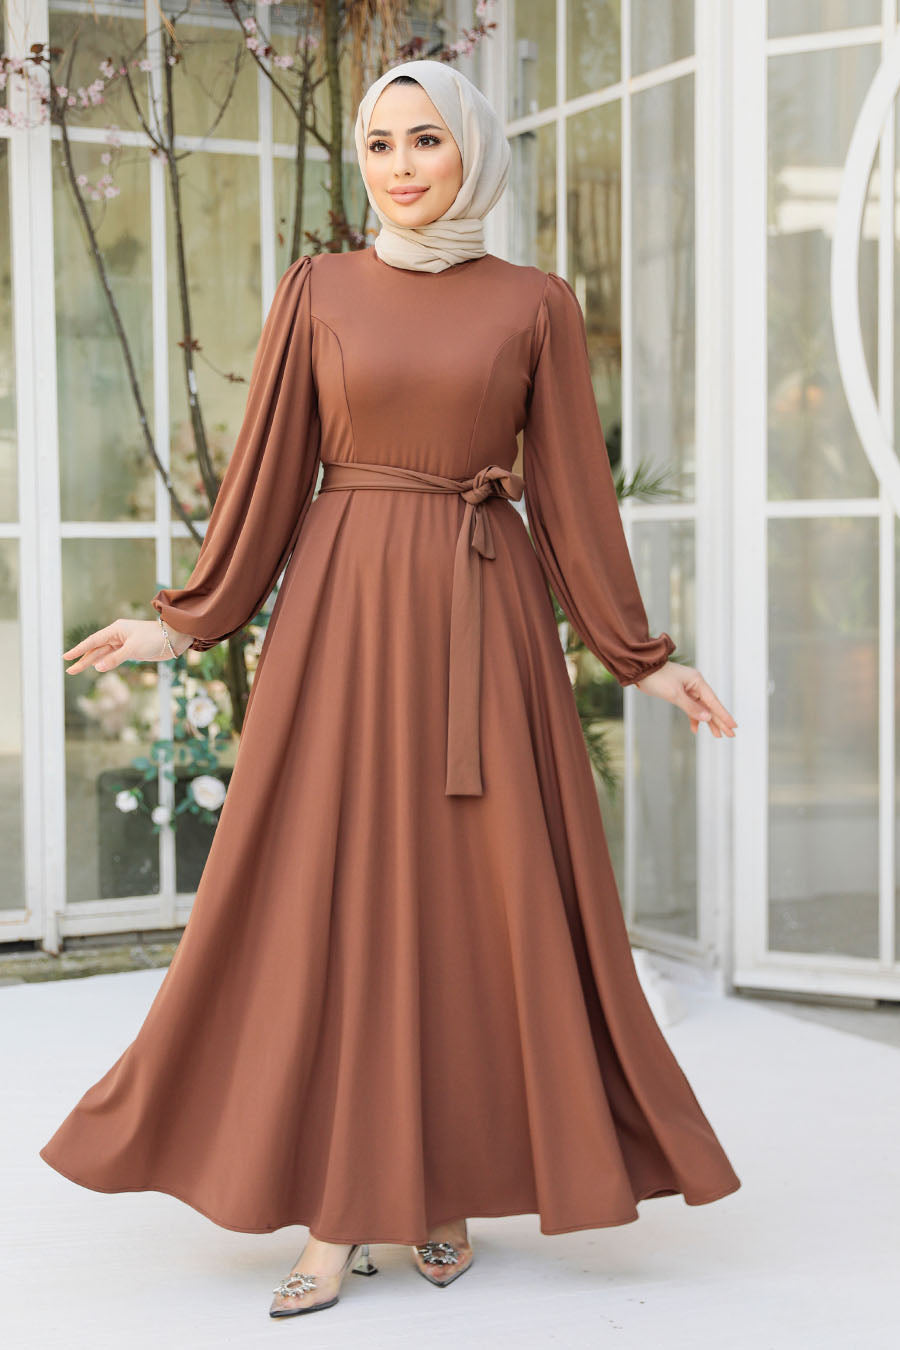 a woman wearing a brown dress and hijab